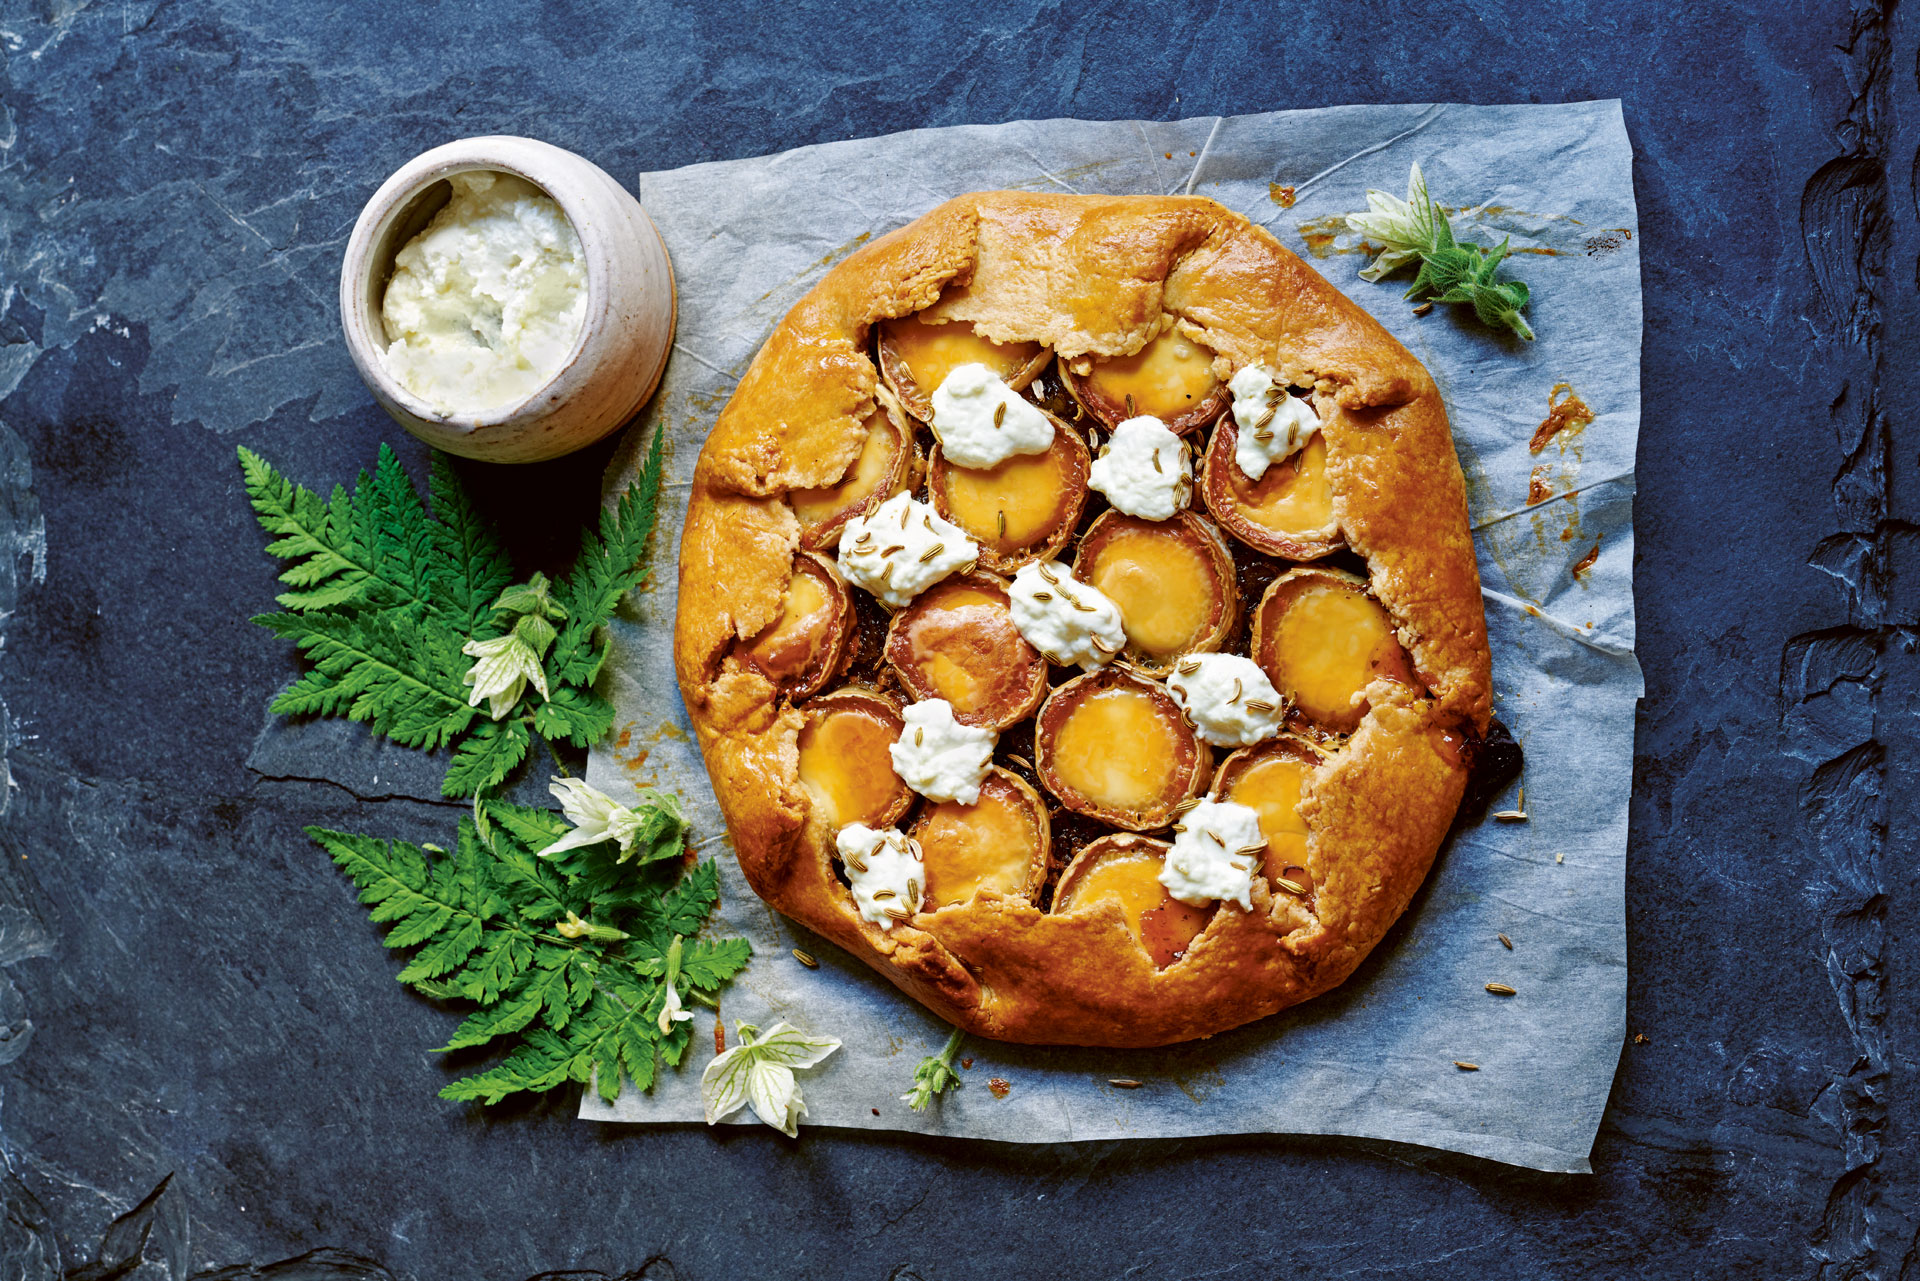 Goats Cheese & Fennel Jam Galette